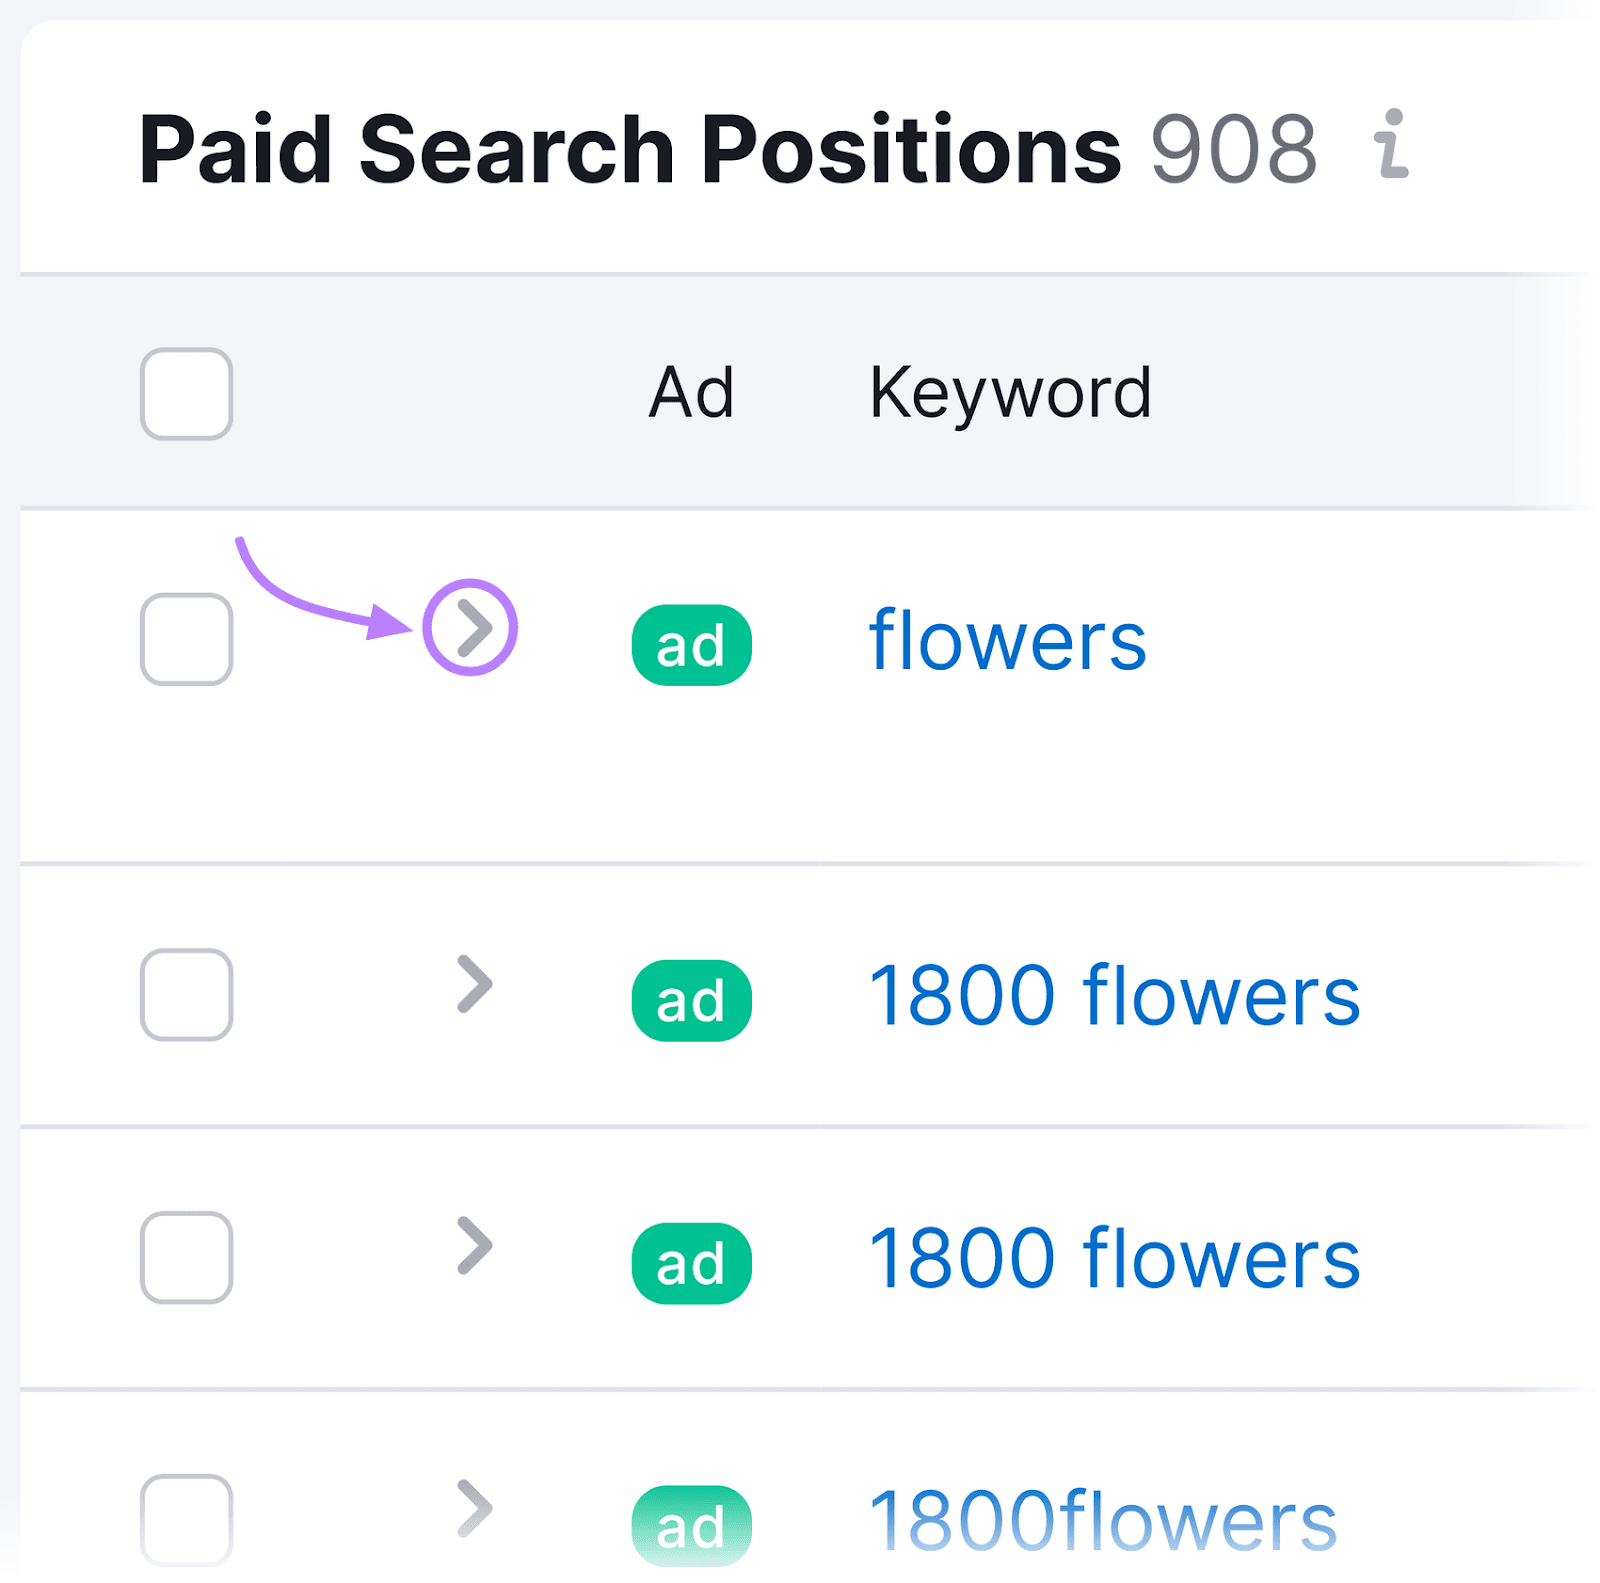 "Paid Search Positions" keywords marked with "ad" label, with an arrow earlier  it. The arrow for "flowers" is highlighted.